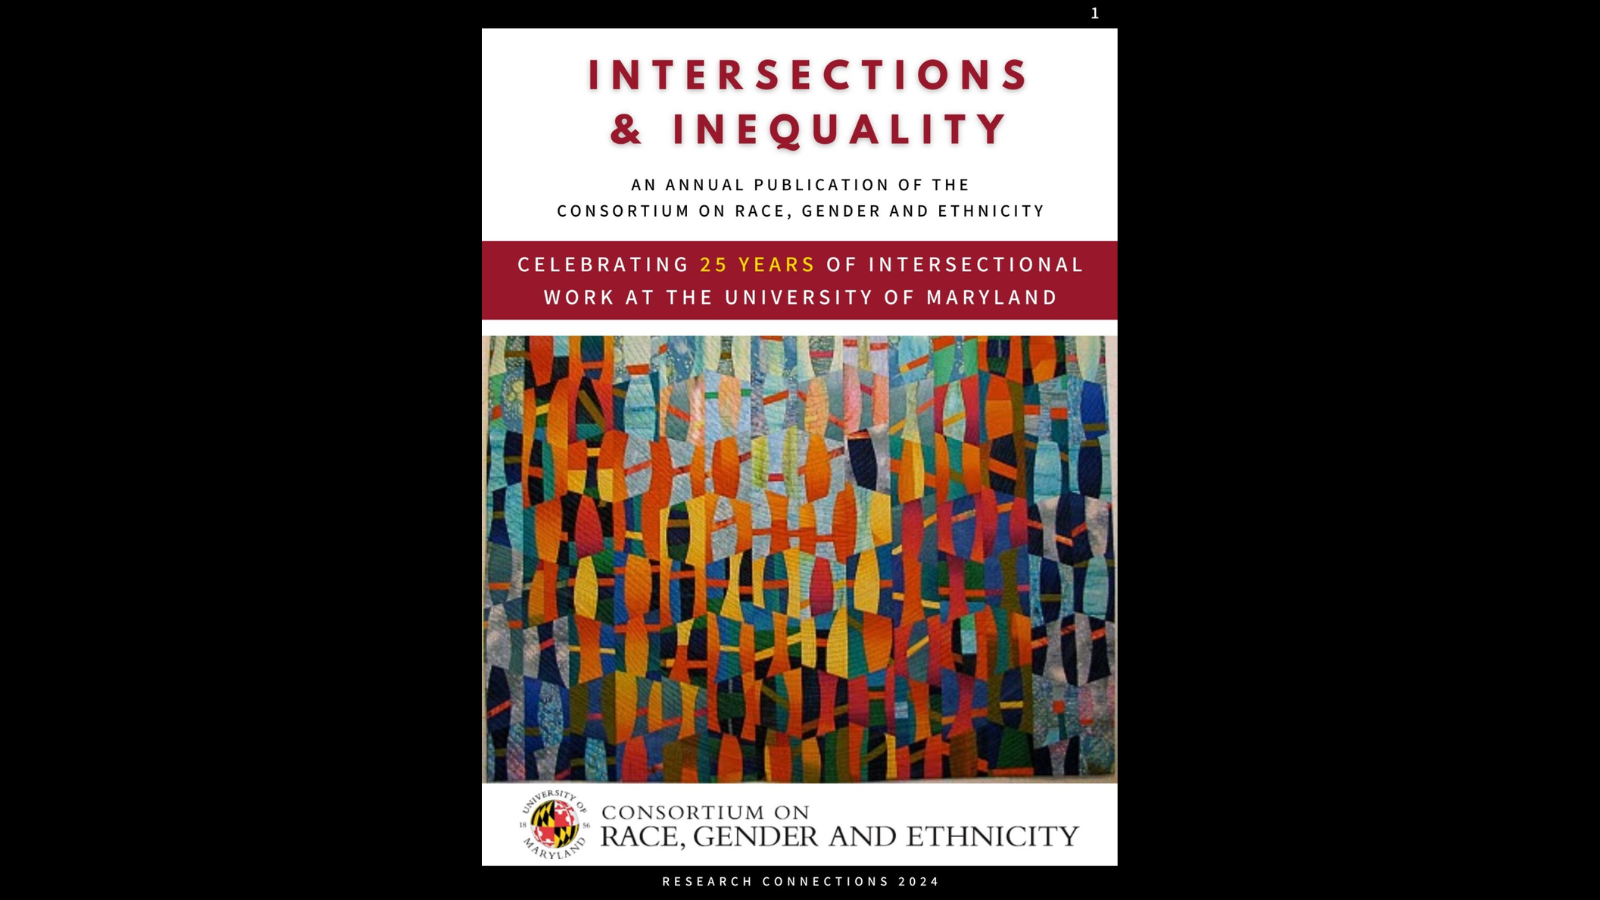 The cover of Intersections & Inequality for 2024 featuring an abstracted quilted work of art on a white background with black and red text. The CRGE logo is displayed along the bottom of the cover.